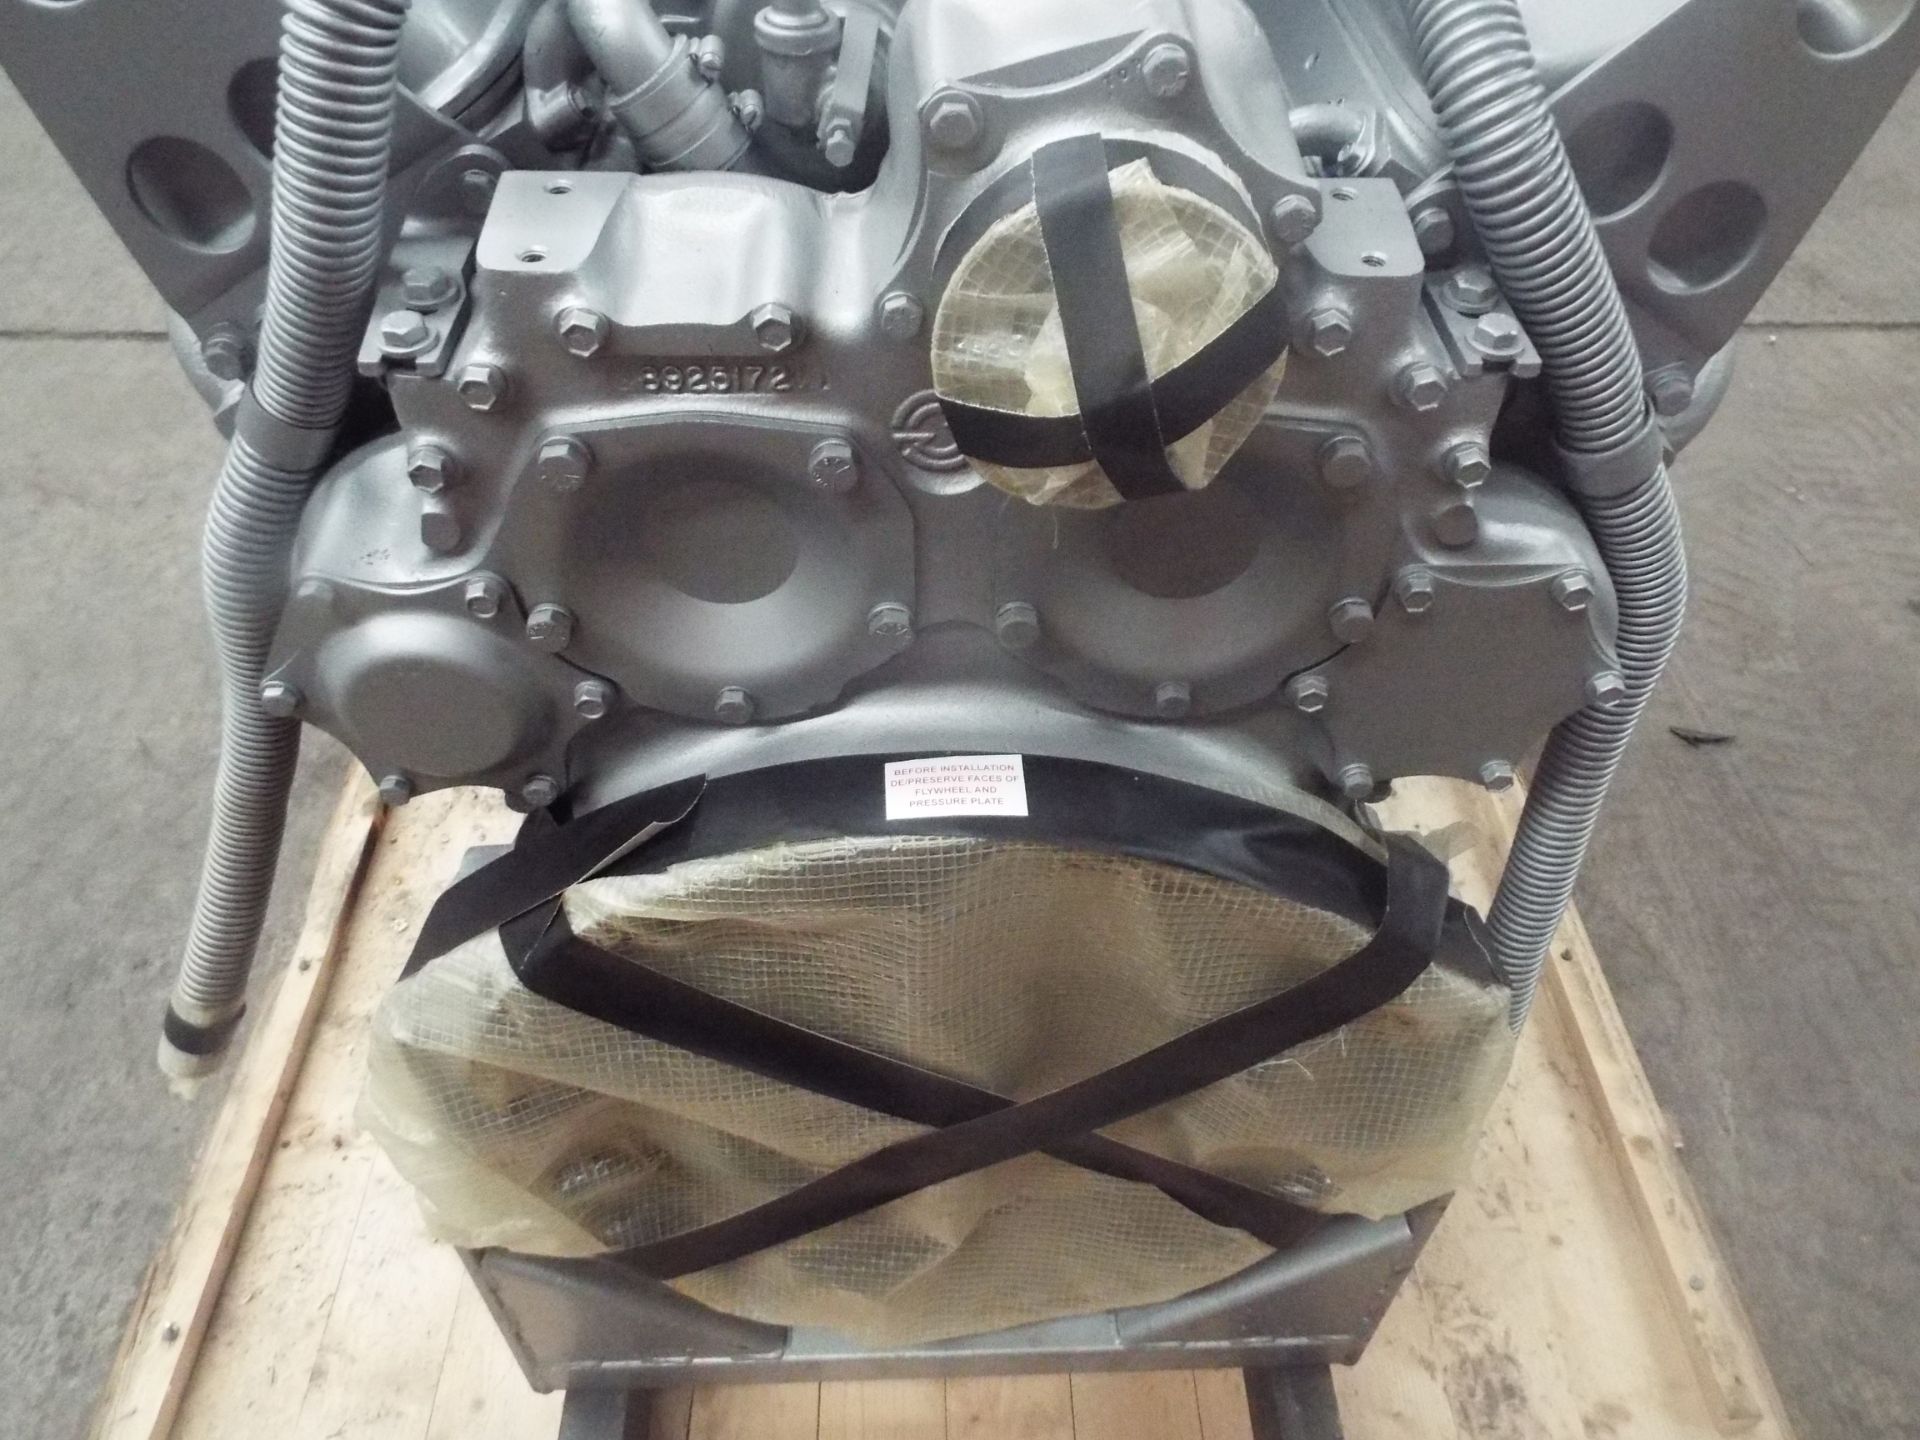 Detroit 8V-92TA DDEC V8 Turbo Diesel Engine Complete with Ancillaries and Starter Motor - Image 12 of 20